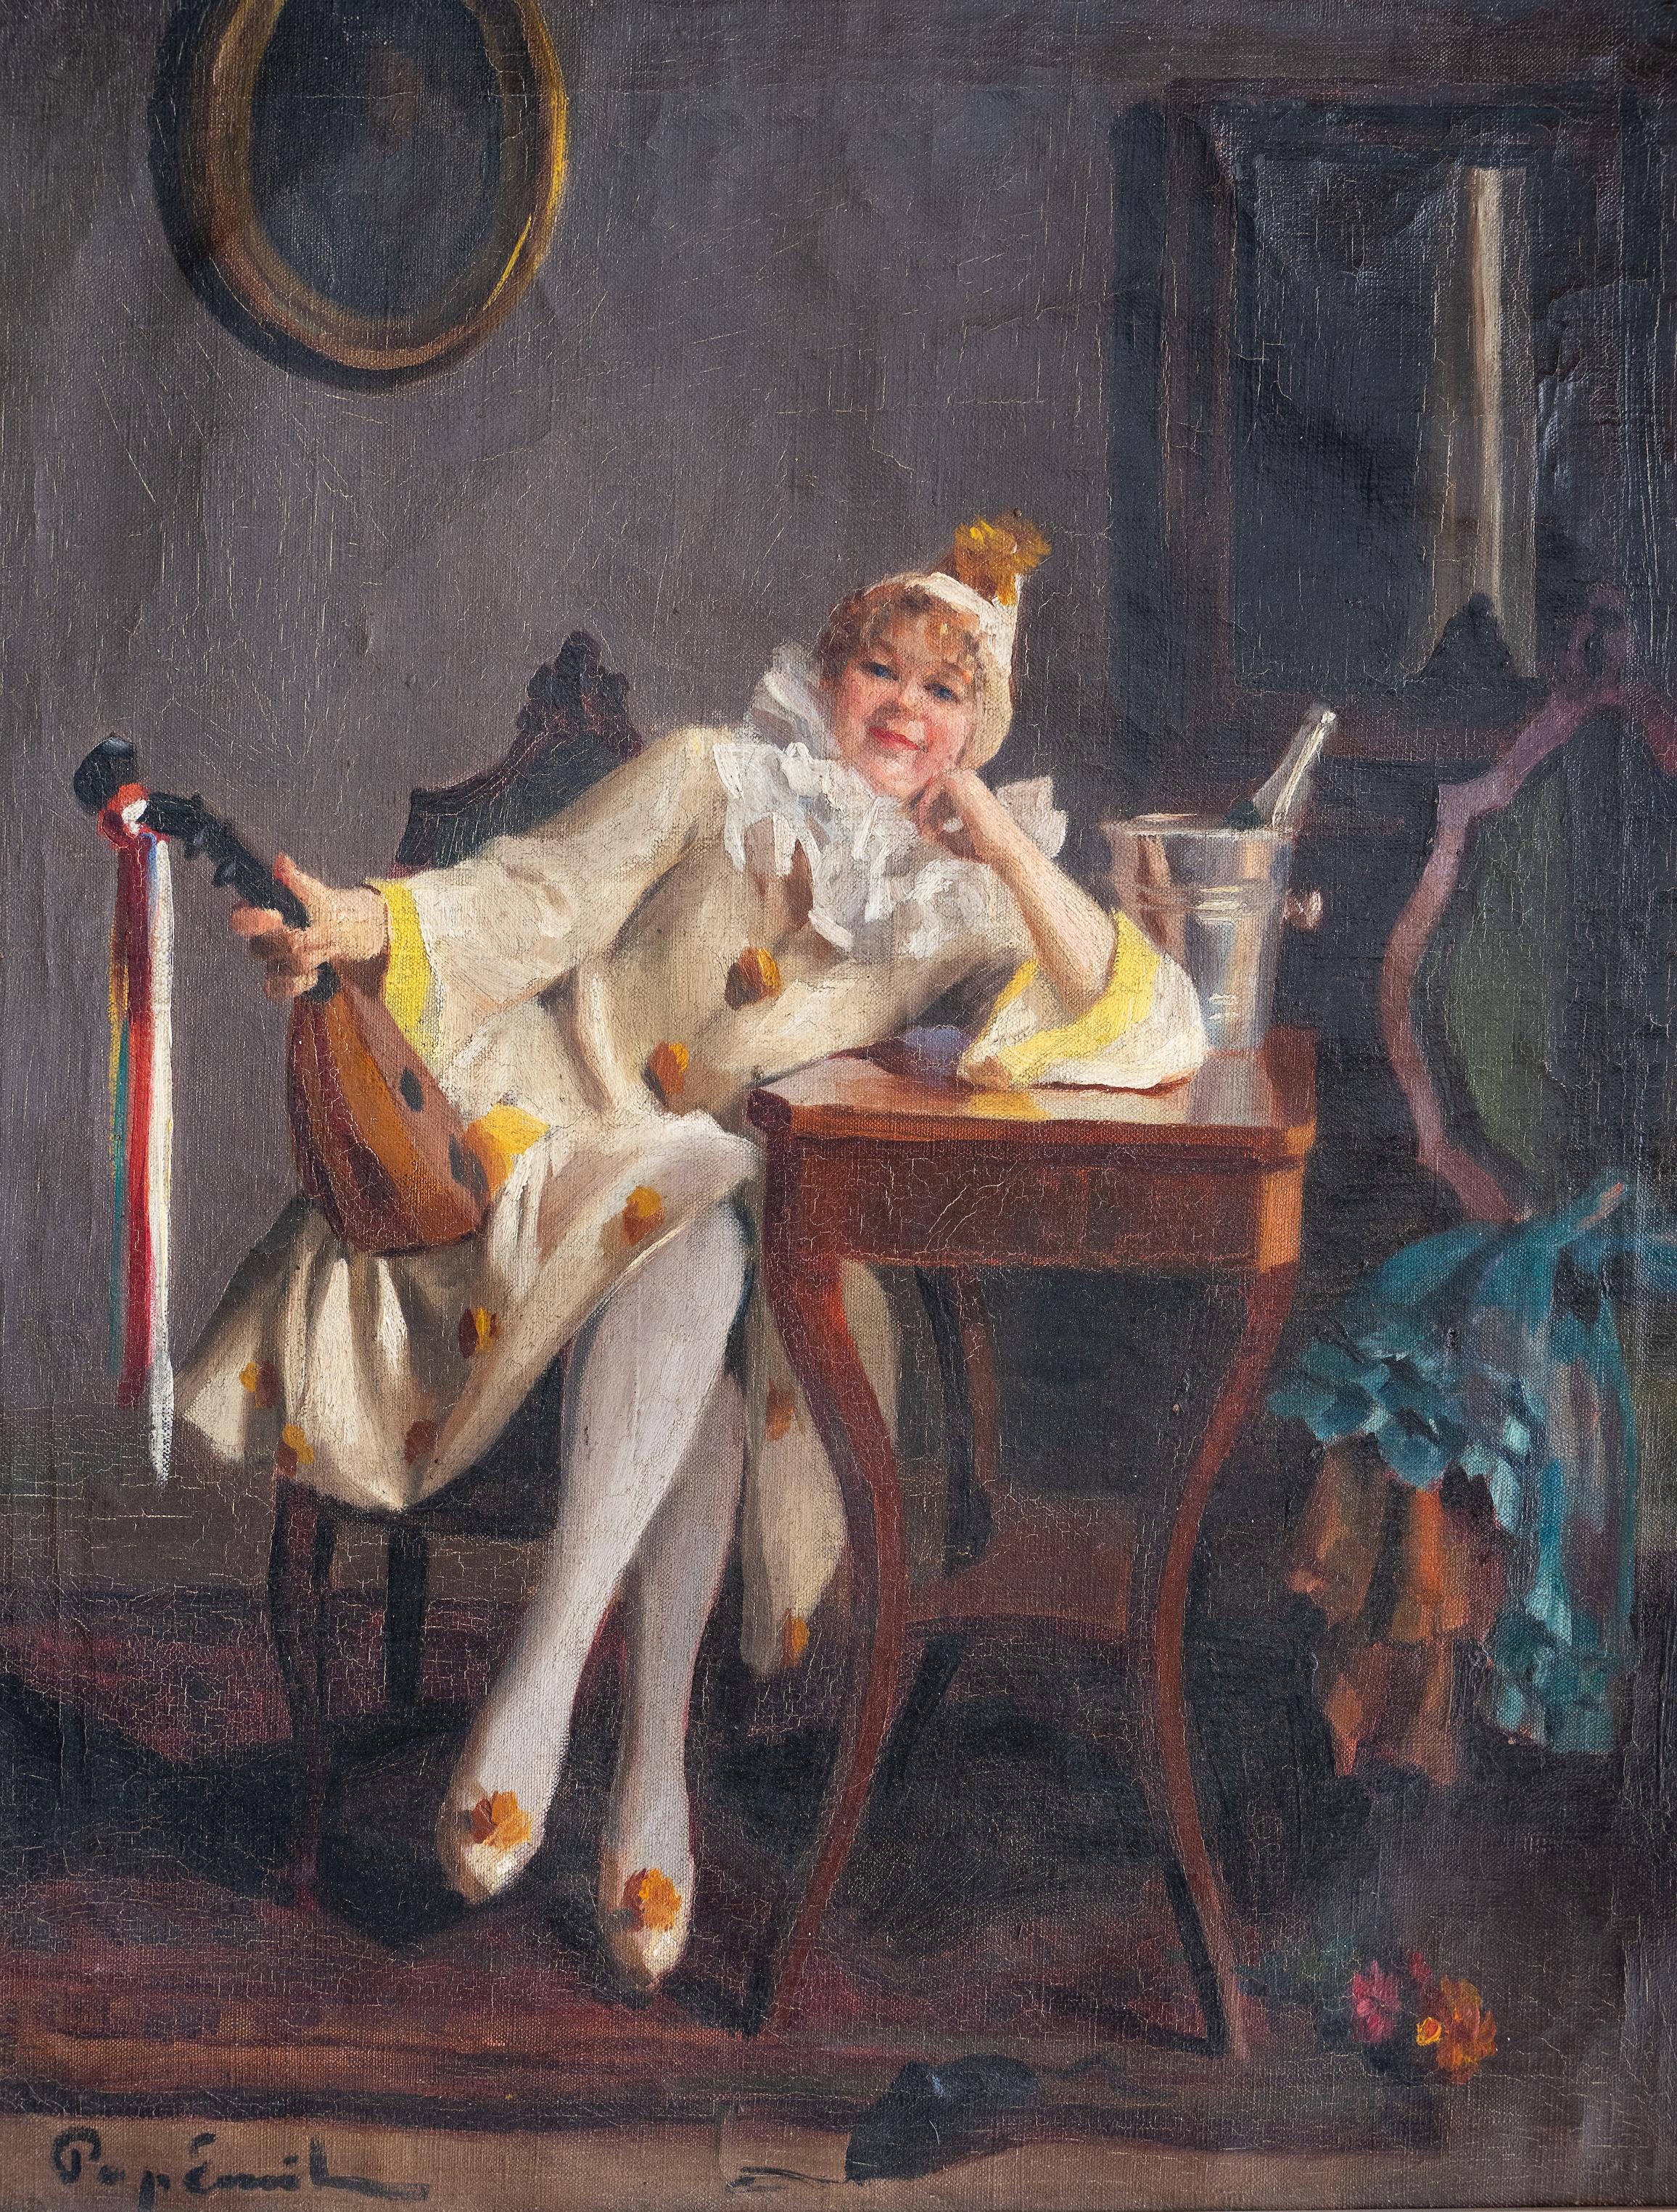 Painting depicting Pierrot, signed Emil Pap
Era: early 1900s
Material: Oil On Canvas
Author: Emil Pap
Provenance: Venetian private residence - Italy
Size: 88 x 74 cm with frame, 68 x 55 cm canvas only.
Condition: Very good condition
Description: